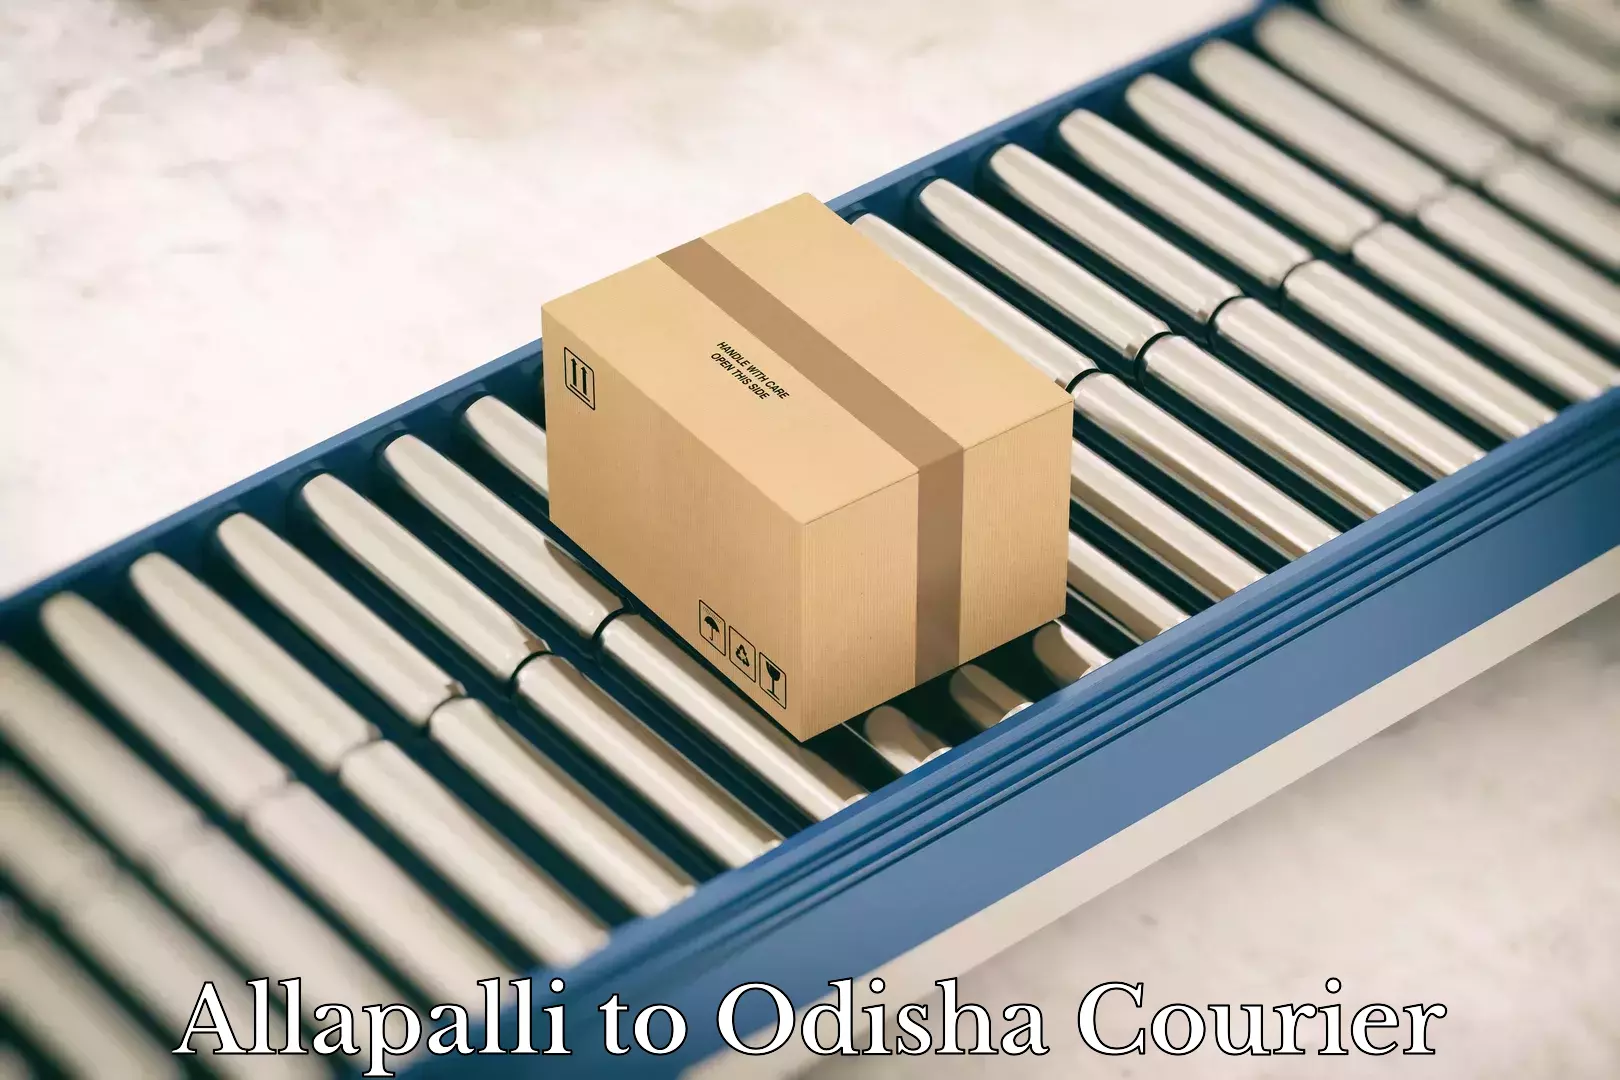 Residential courier service in Allapalli to Odisha